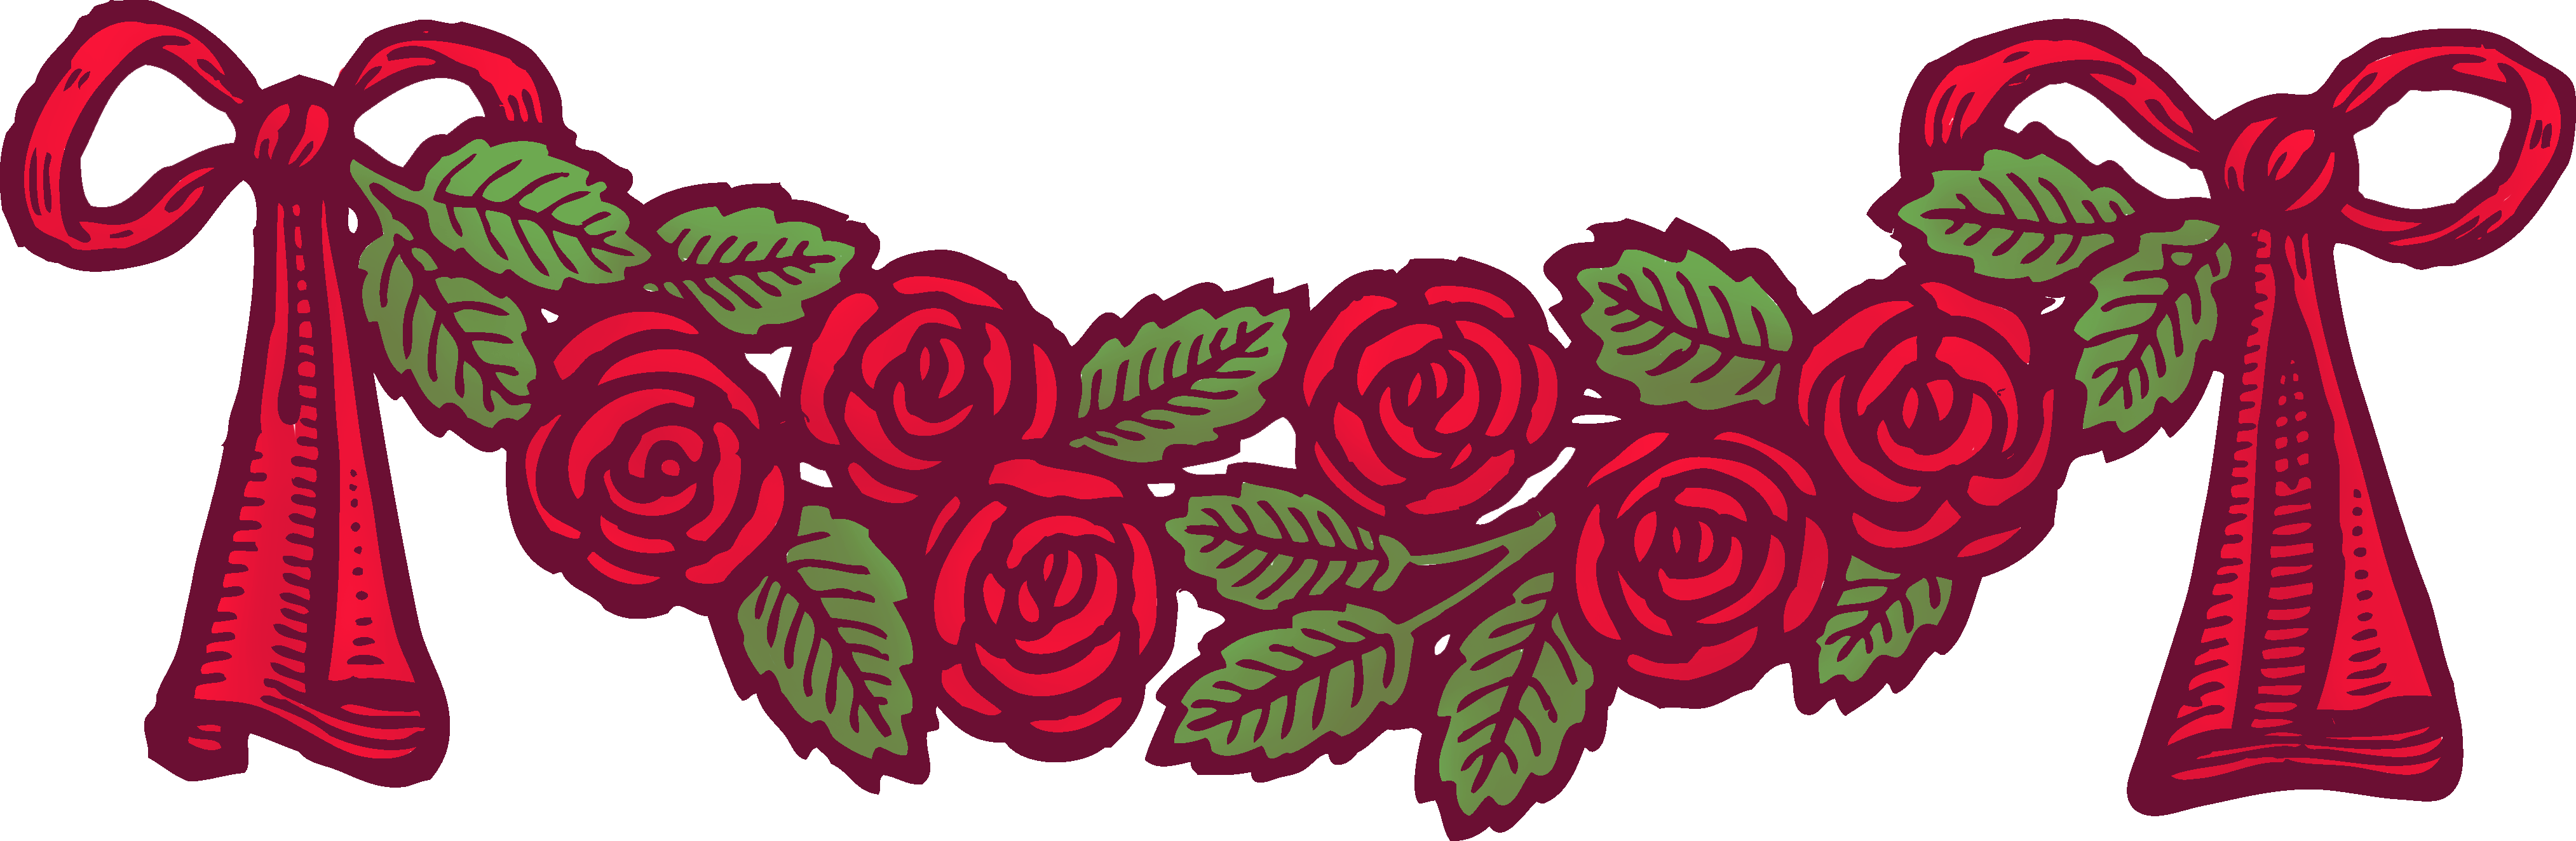 Vintage Red Roses With Ribbons Banner - Banners Vintage Png (4054x1324)